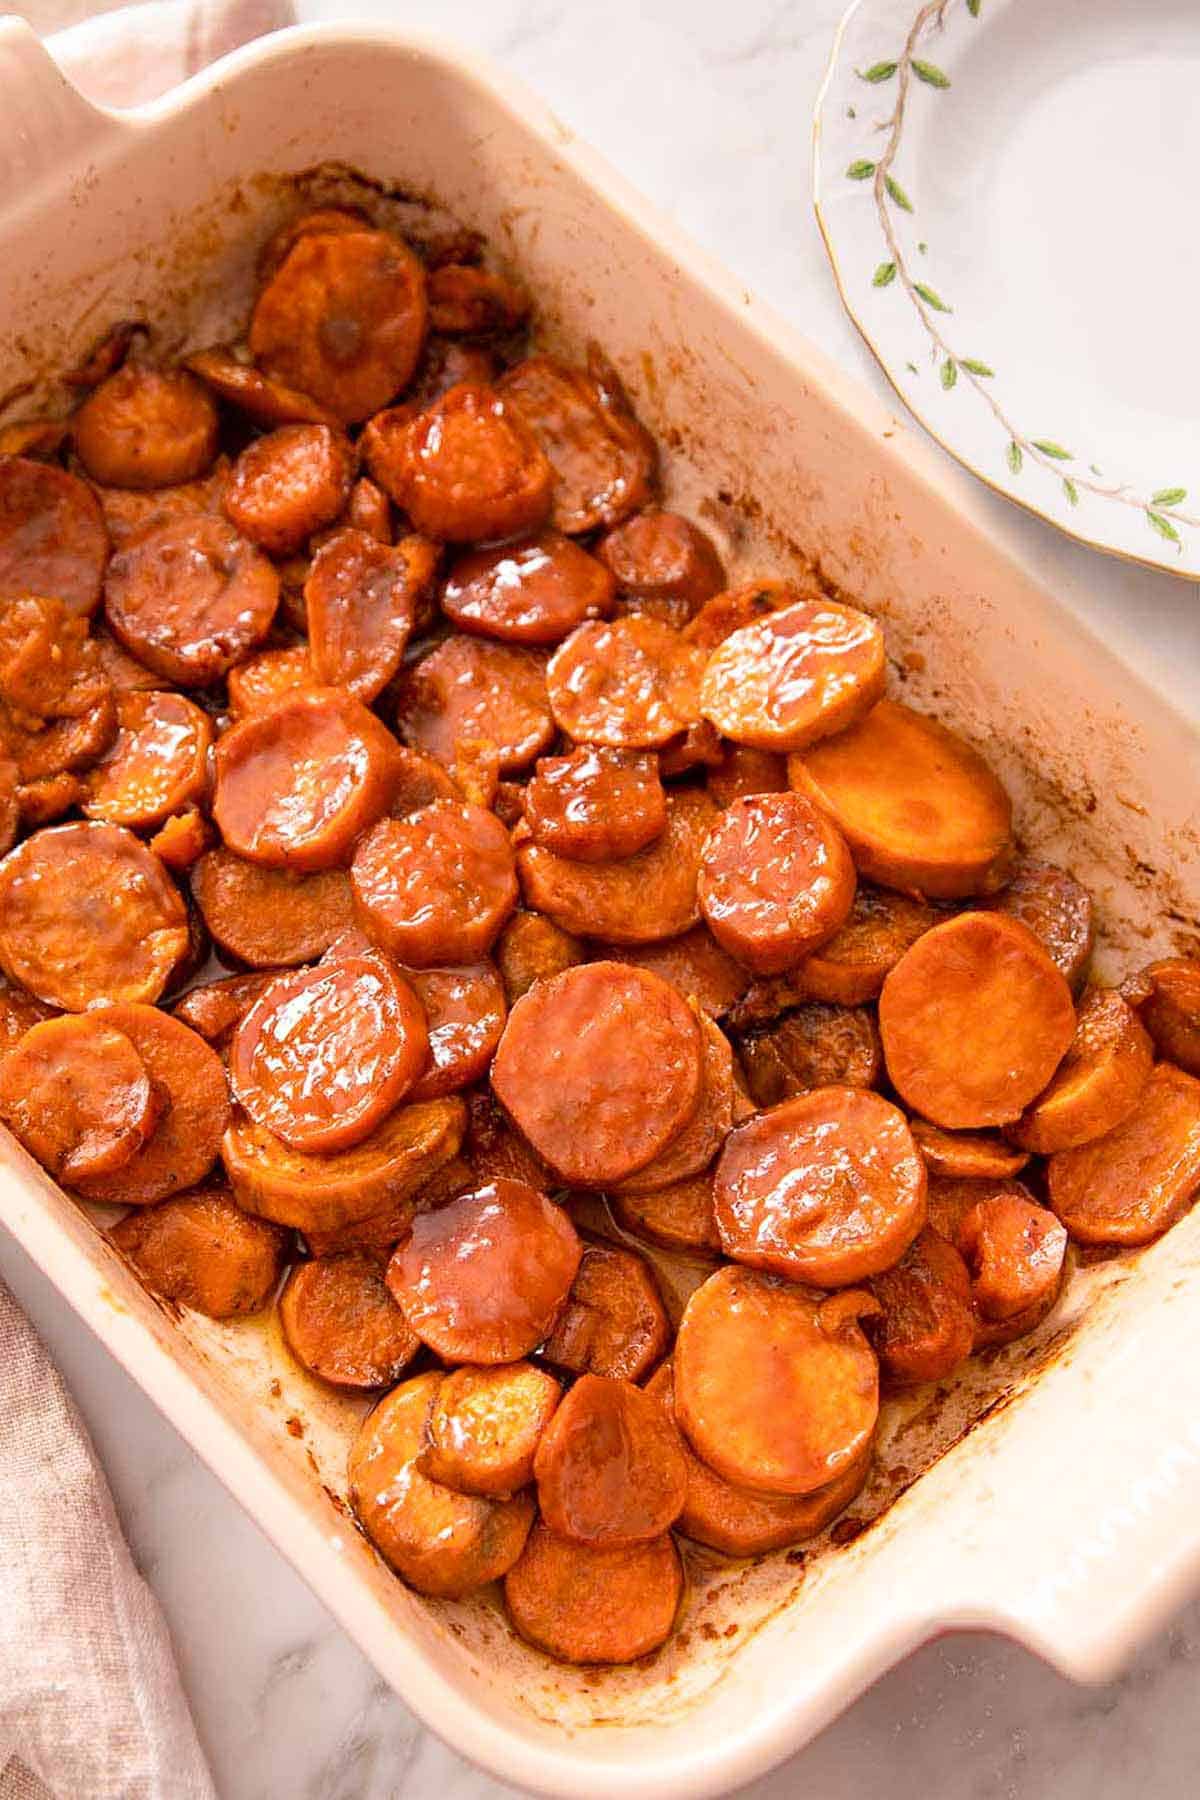 Overhead view of candied yams in a casserole dish.